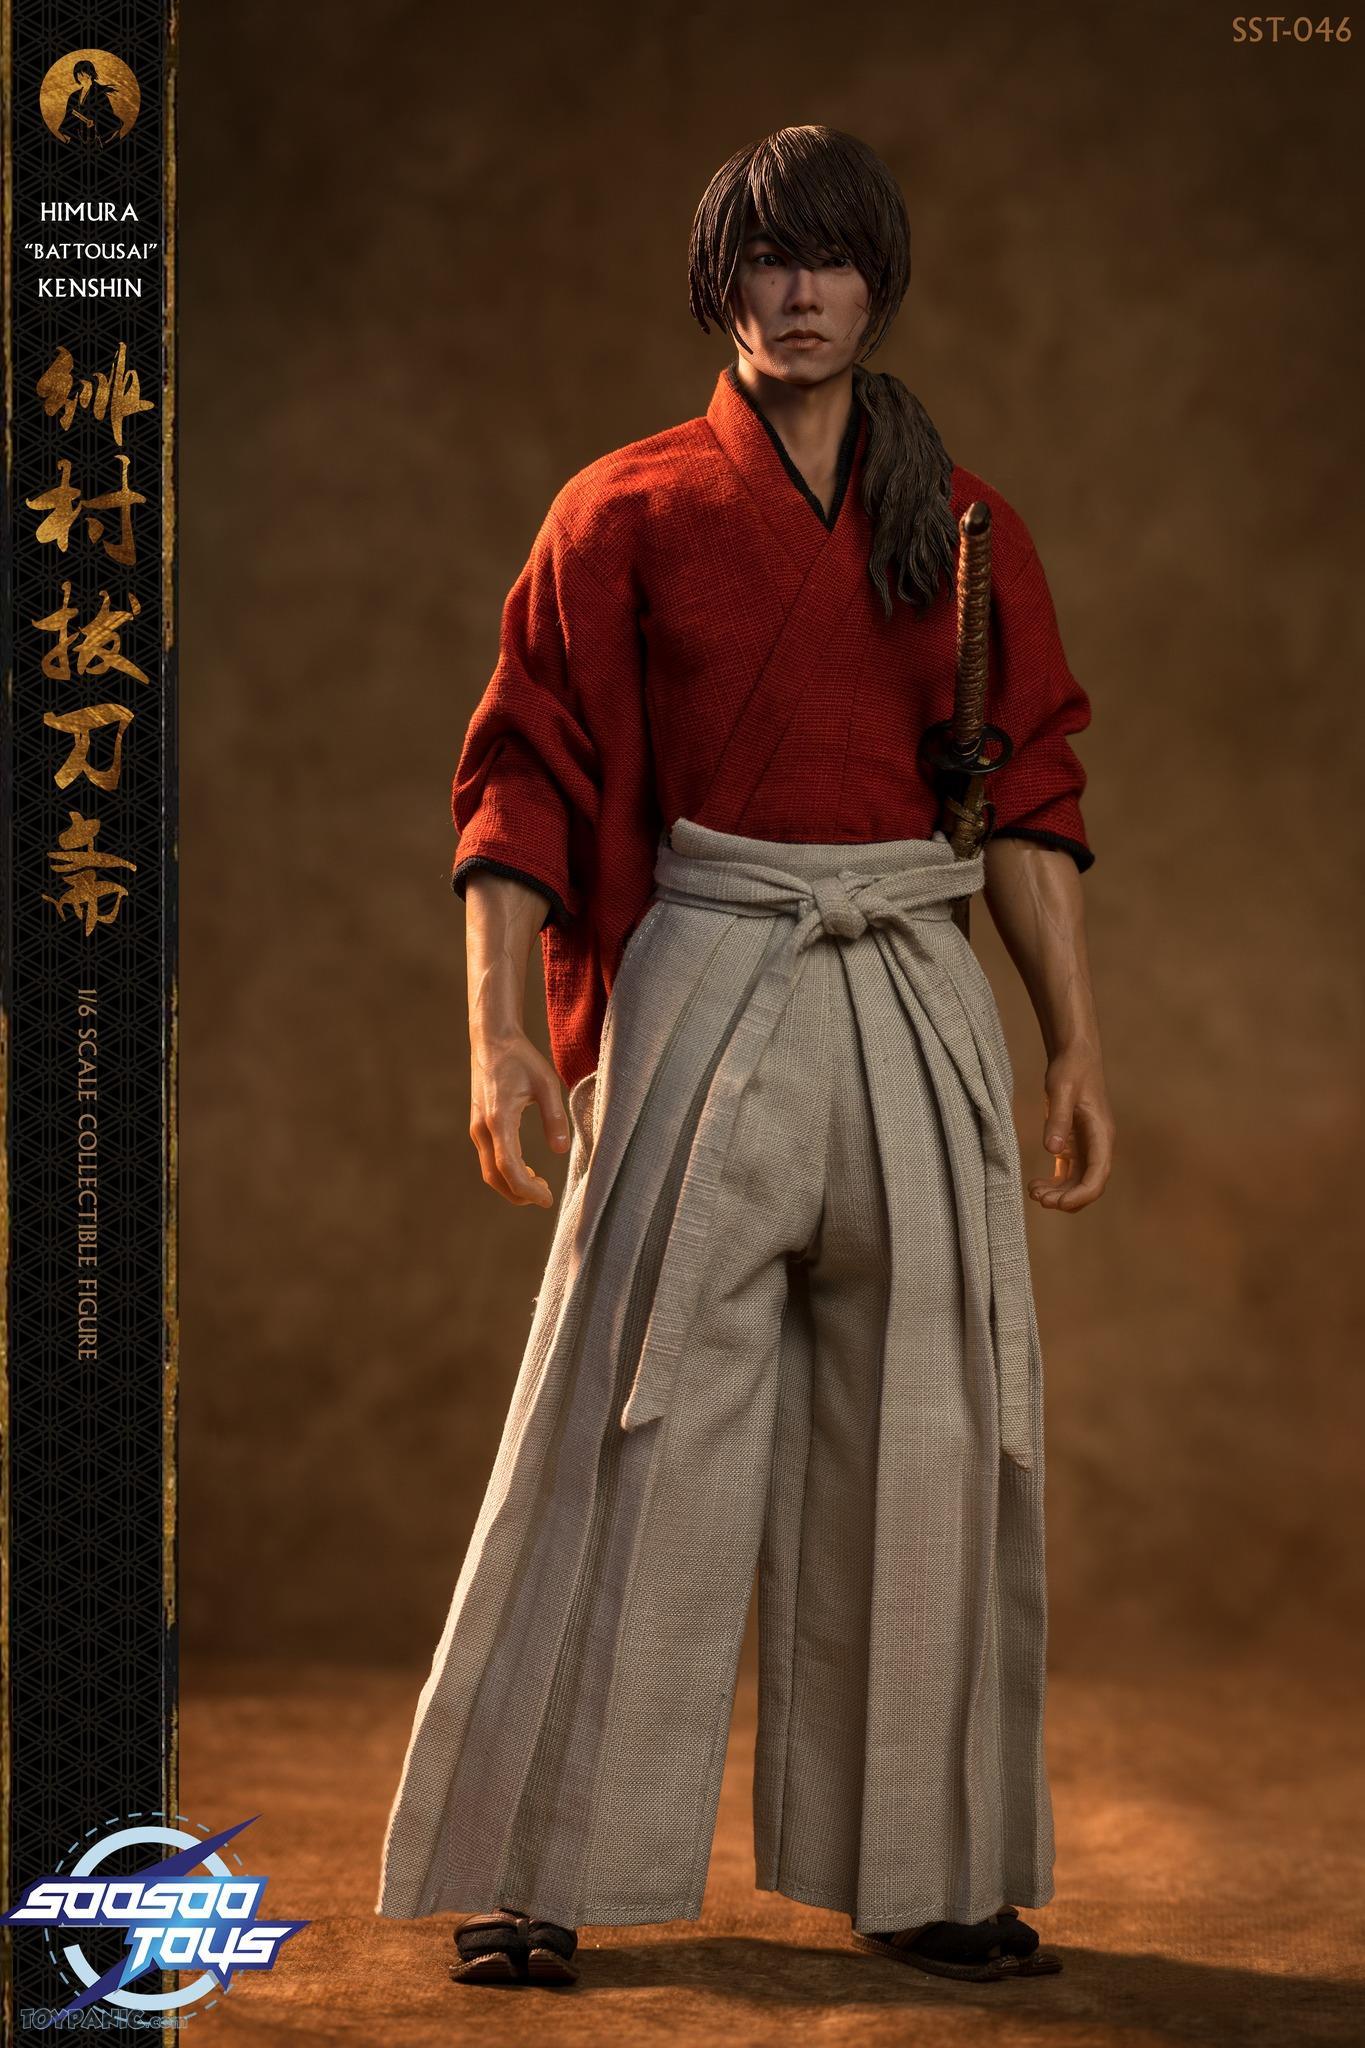 Japanese - NEW PRODUCT: 1/6 scale Rurouni Kenshin Collectible Figure from SooSooToys 712202251233PM_9426670